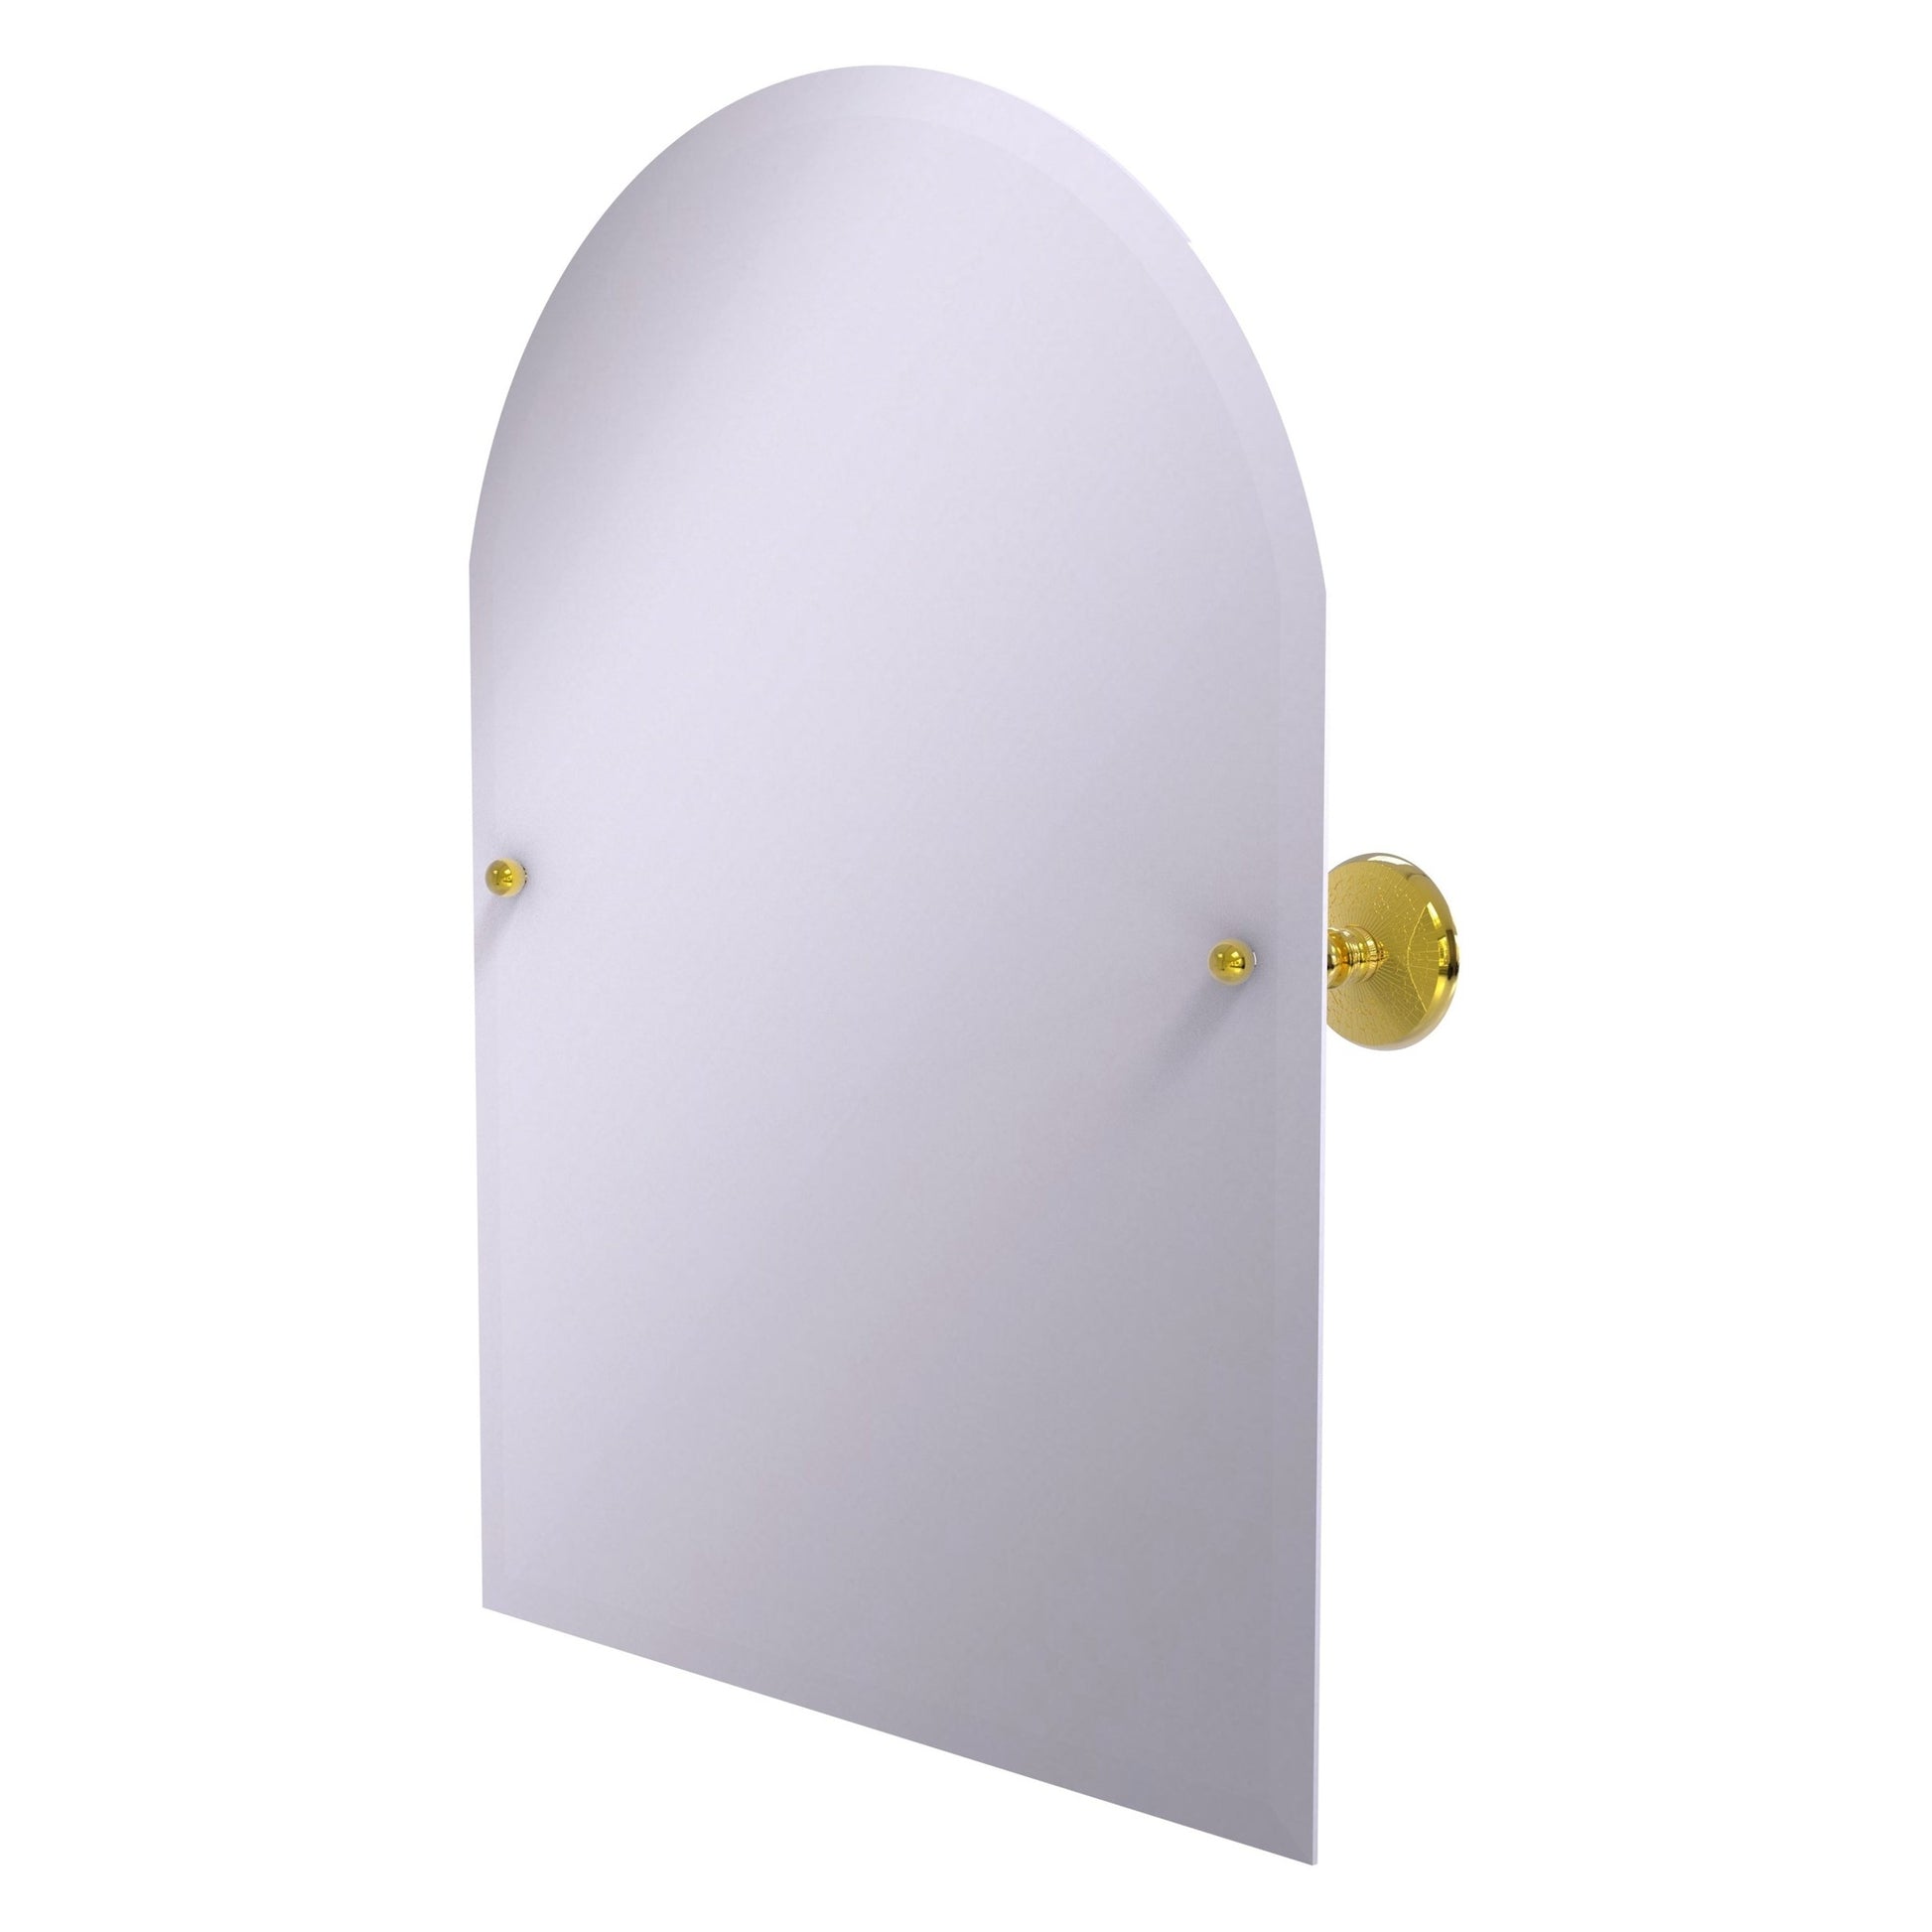 Allied Brass Prestige Monte Carlo 29" x 21" Polished Brass Solid Brass Frameless Arched Top Tilt Mirror With Beveled Edge